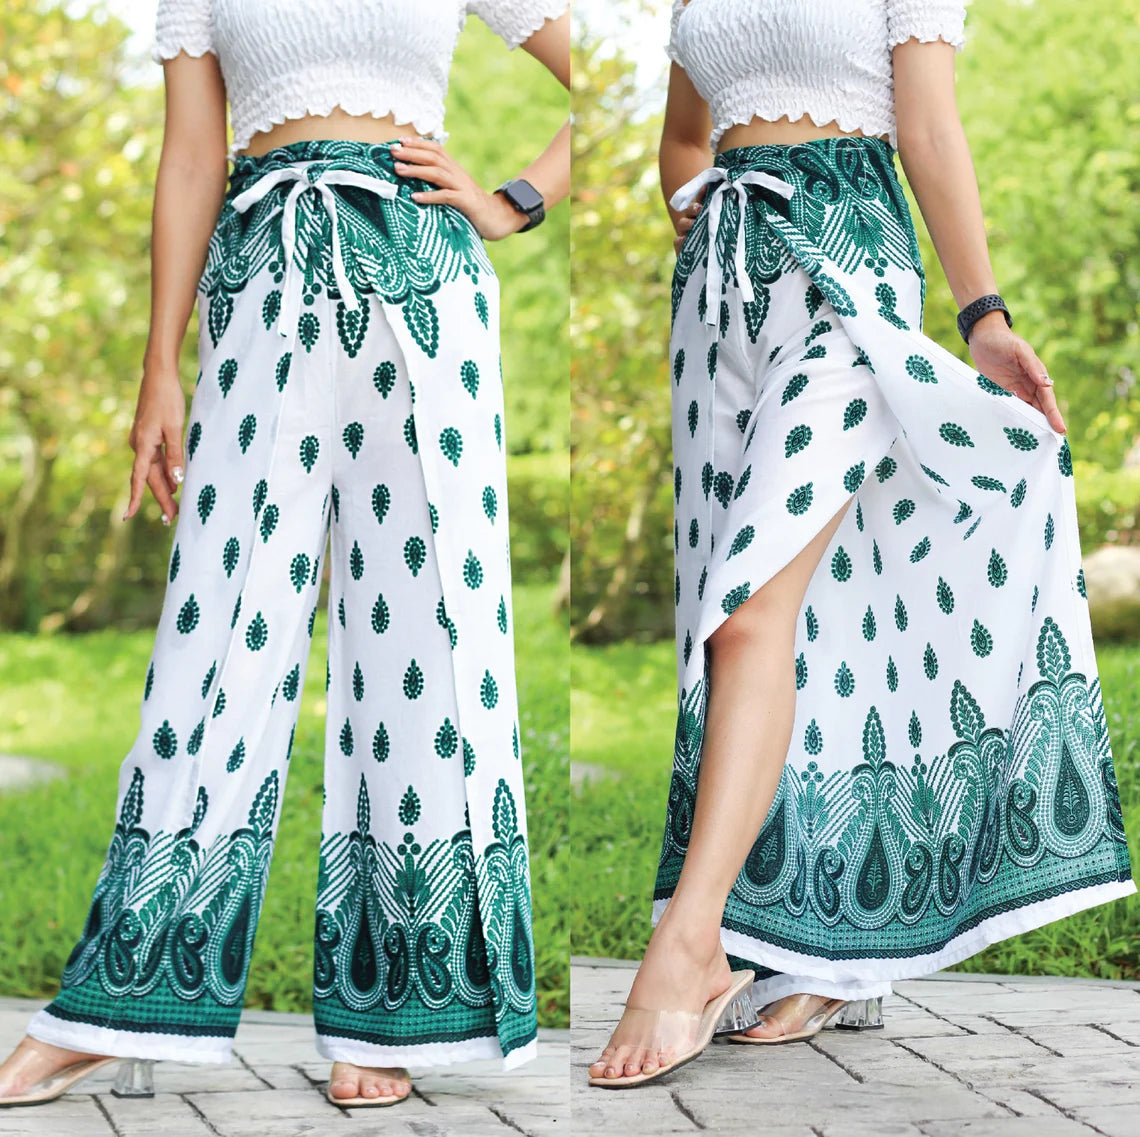 A person wearing stylish boho wrap pants with a white and green pattern, paired with a white top, showcasing the outfit’s versatility and comfort.